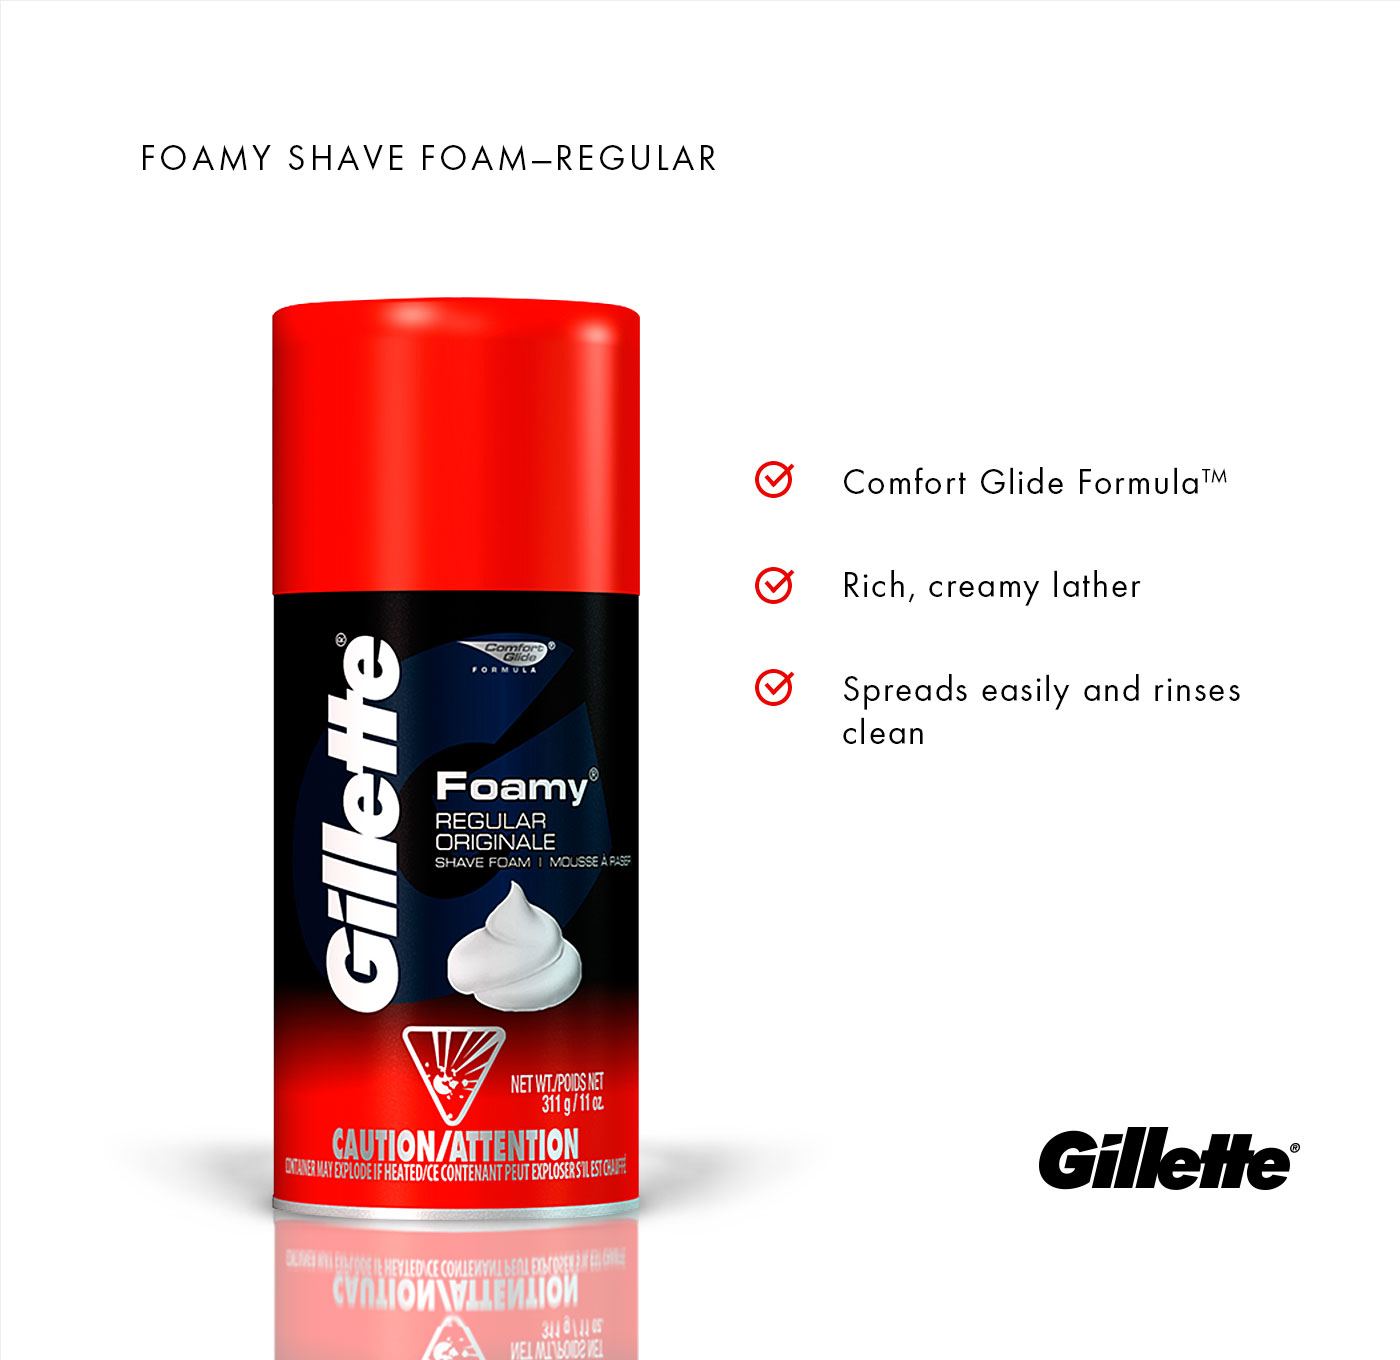 Shaving and Personal Care Products Logo - Classic Shaving Foam | Gillette